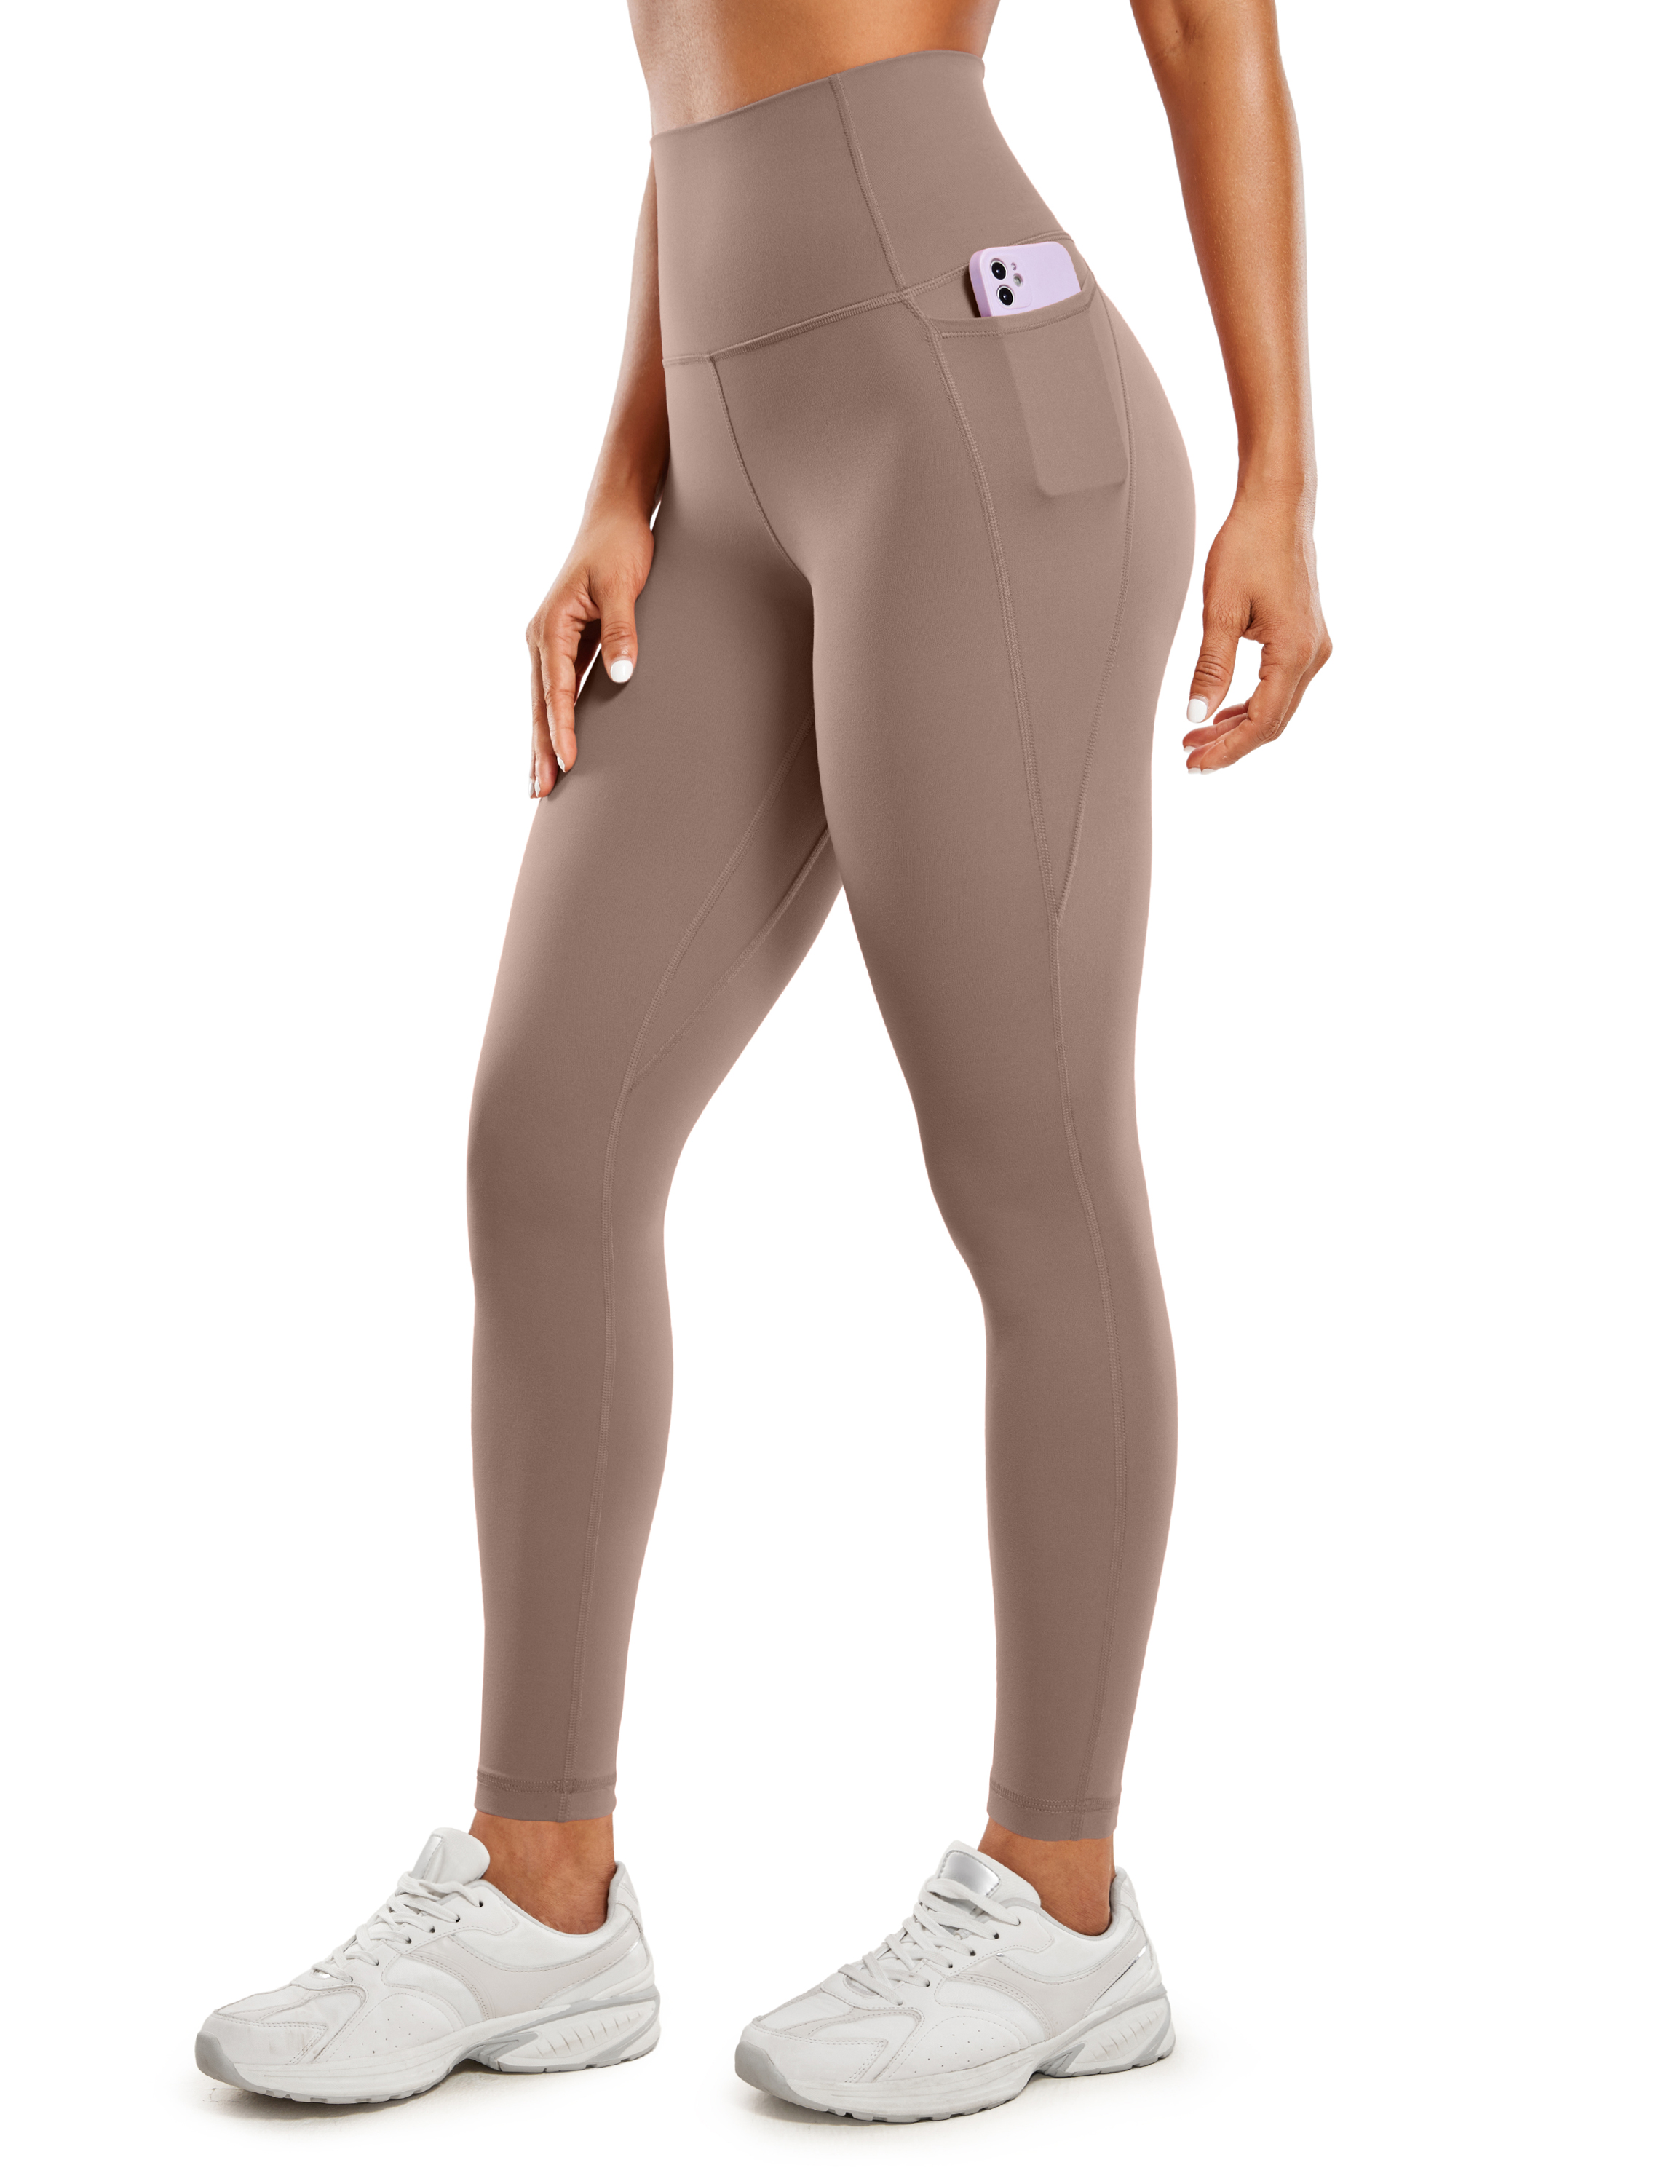 CRZ YOGA Womens Butterluxe Workout Leggings 28 inches High Waisted